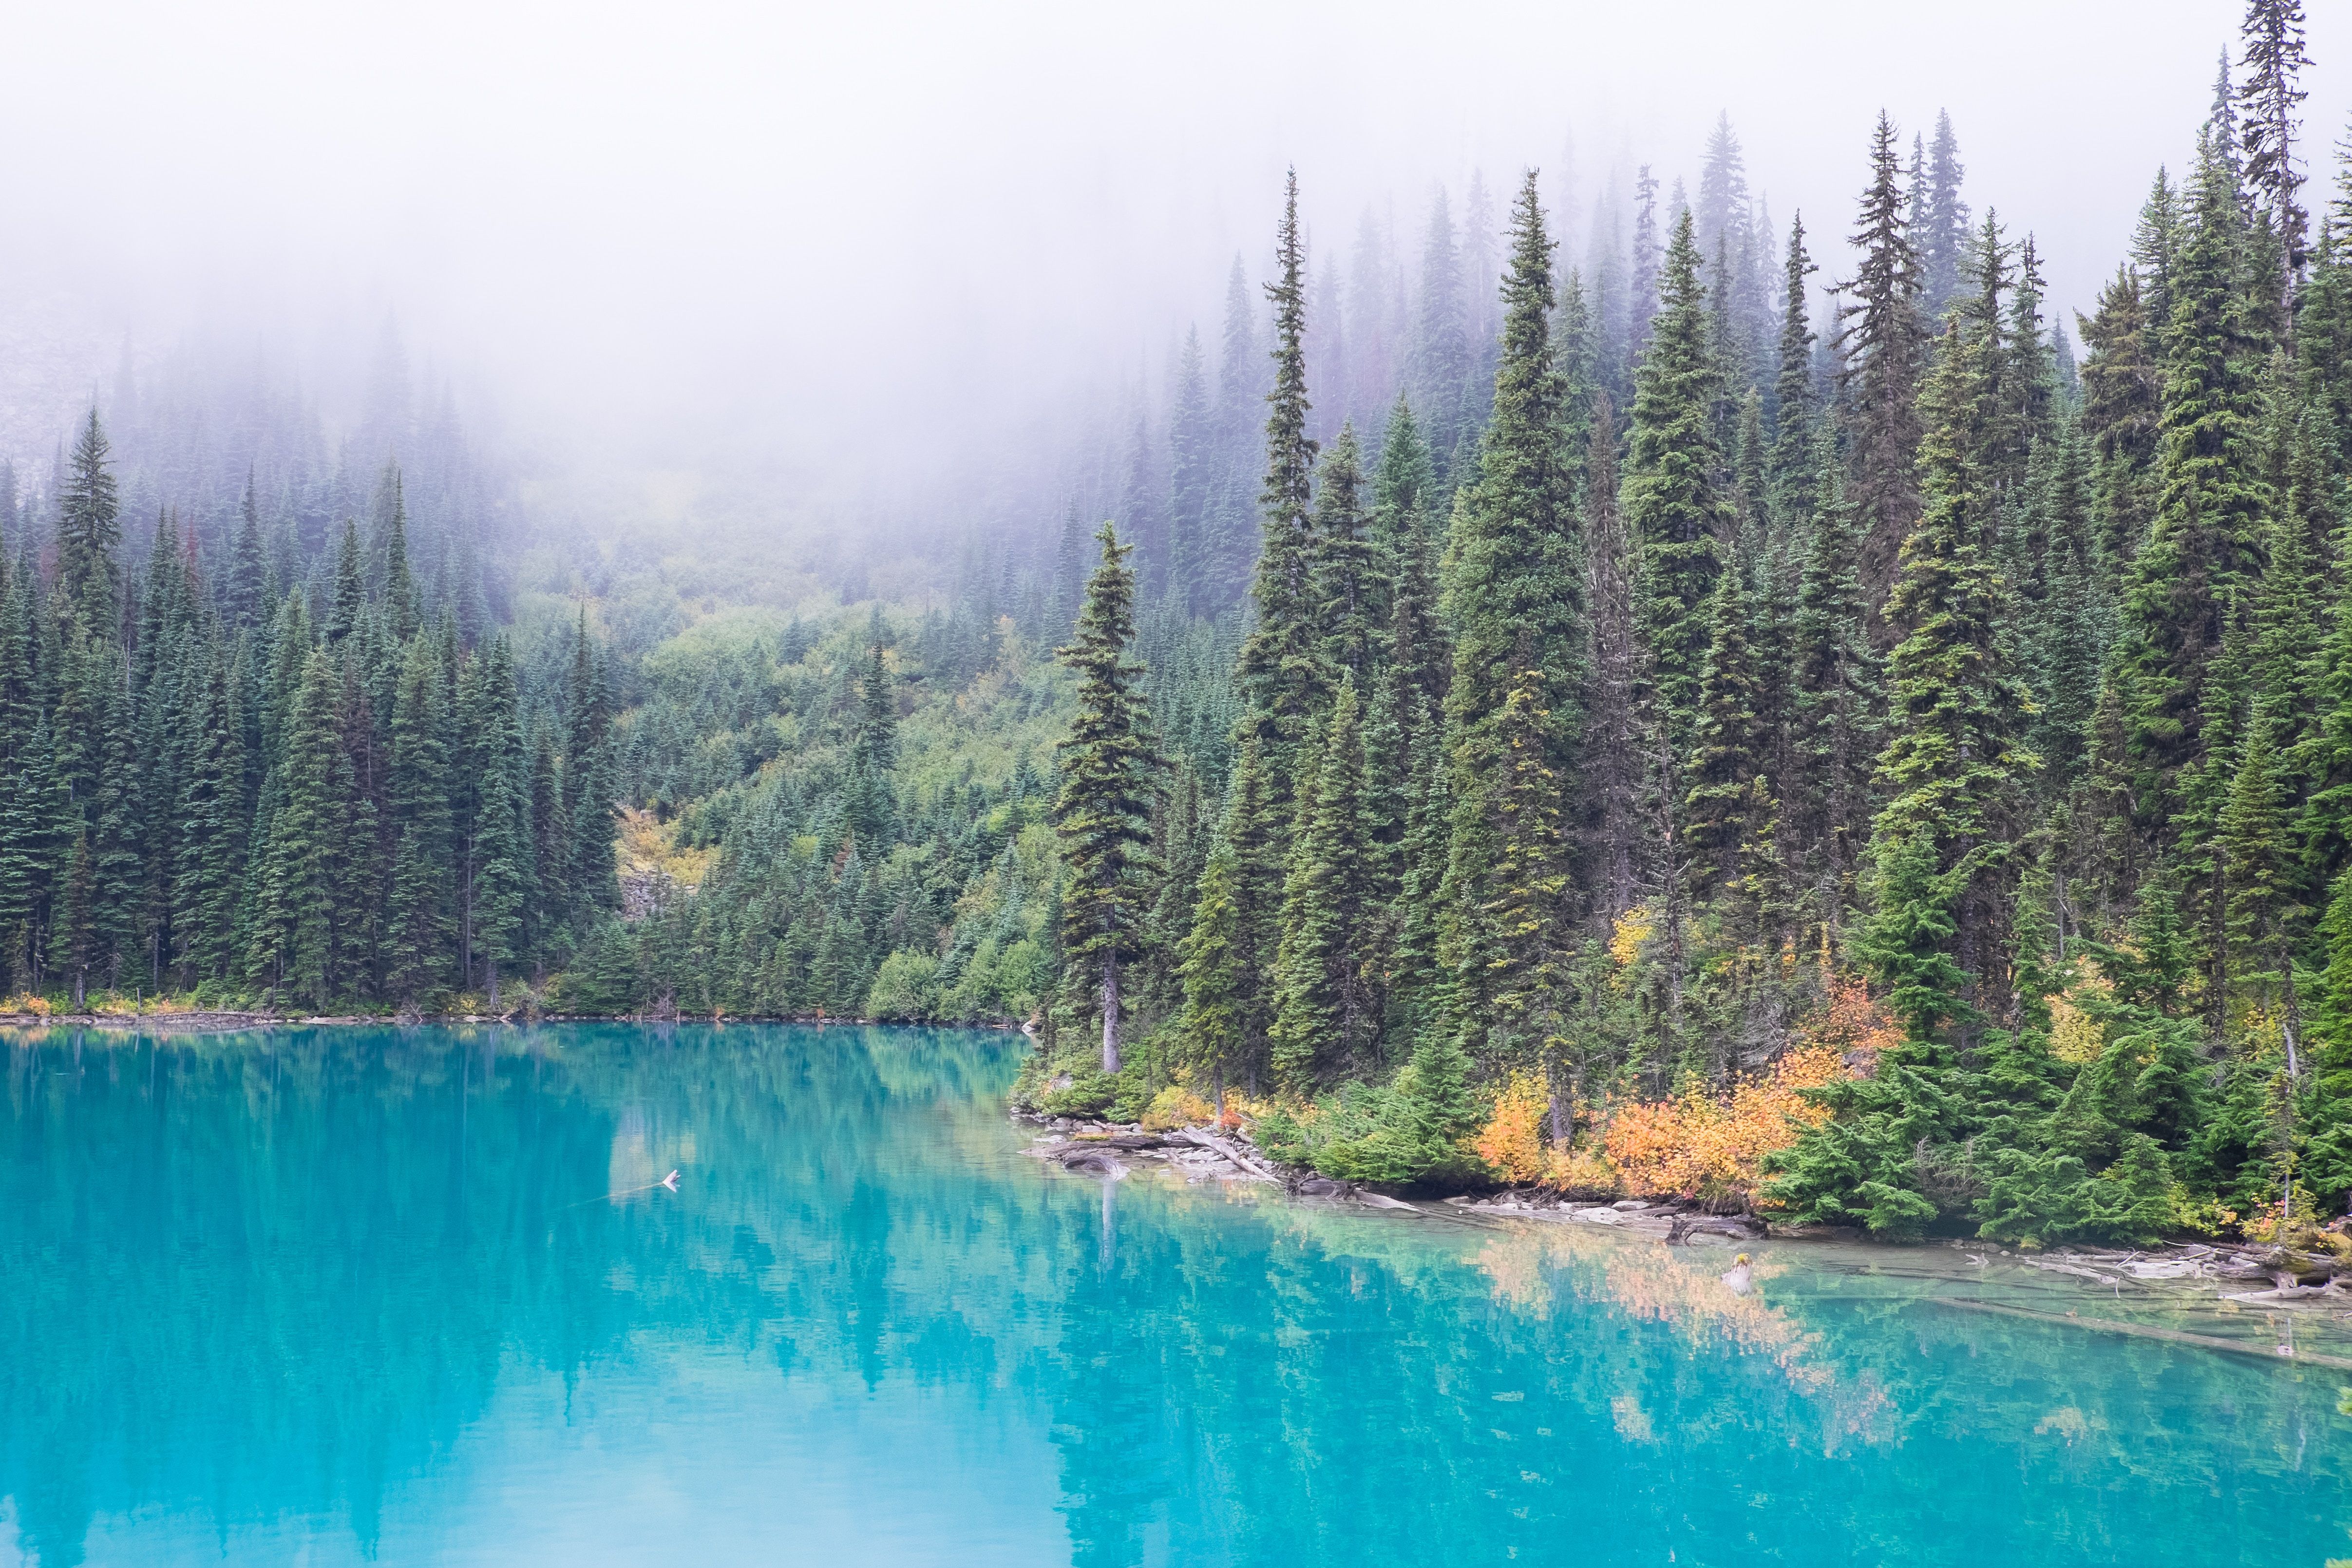 4828x3219 #blue, #glacier, #turquoise, #nature, #river, #water, # autumn, #vancouver, #british columbium, #PNG image, #cloudy, #mist, #joffre lake, #lake, #forest, #camping, #fog, #reflection, #pine, #canada, #tree. Mocah.org HD Desktop Wallpaper